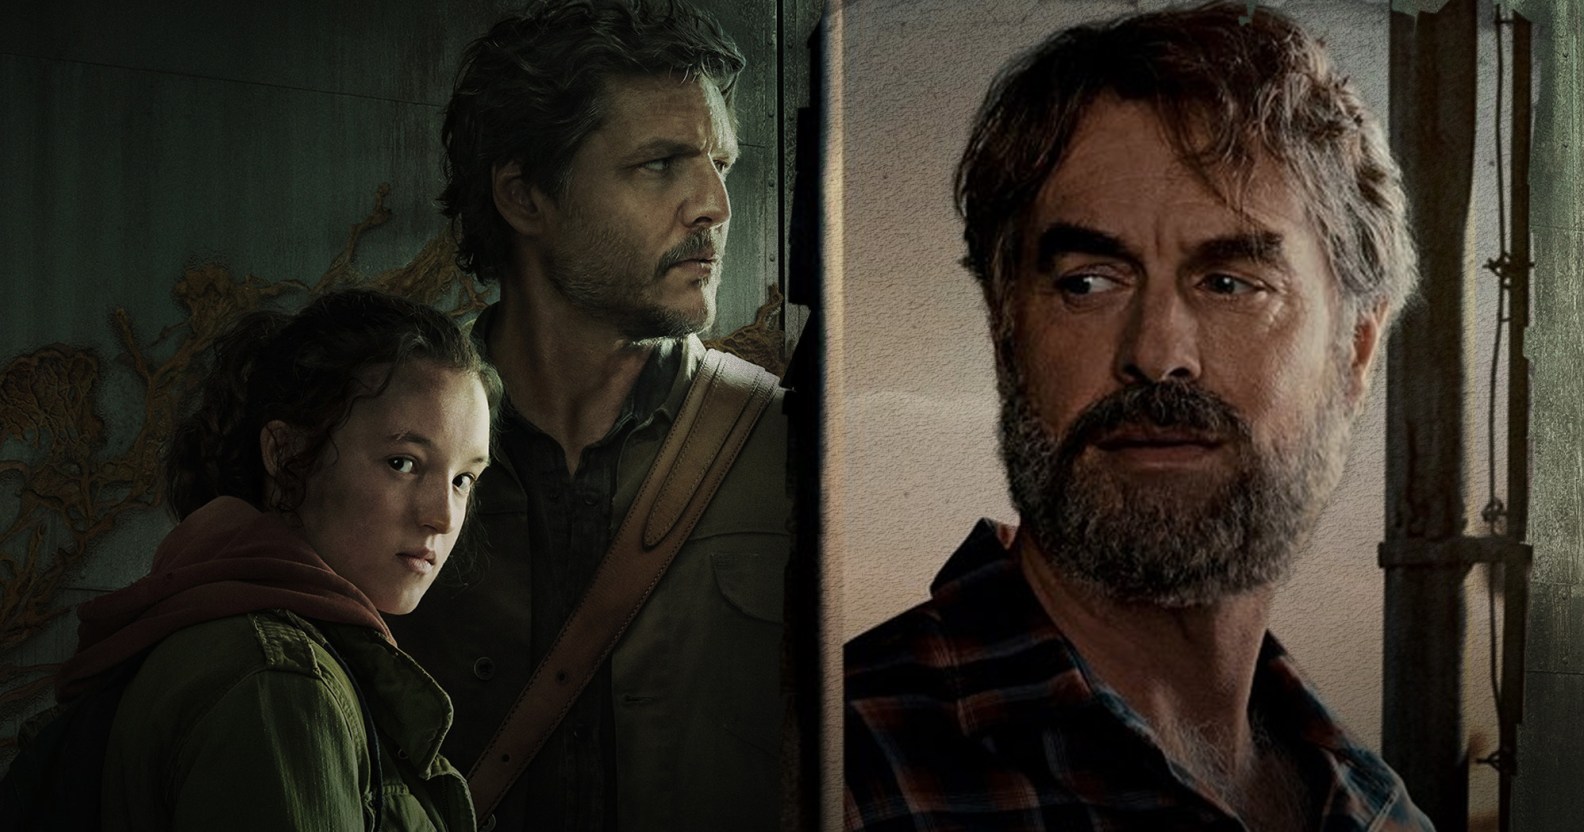 A side-by-side image shows the promo poster of HBO's The Last of Us on the left; with main characters Joel (Pedro Pascal) and Ellie (Bella Ramsey) wearing dark green jackets and standing in a corridor where you can see graffiti on the wall. On the right-hand image you can see actor Murray Bartlett as gay character Frank who has a beard and is wearing a dark shirt